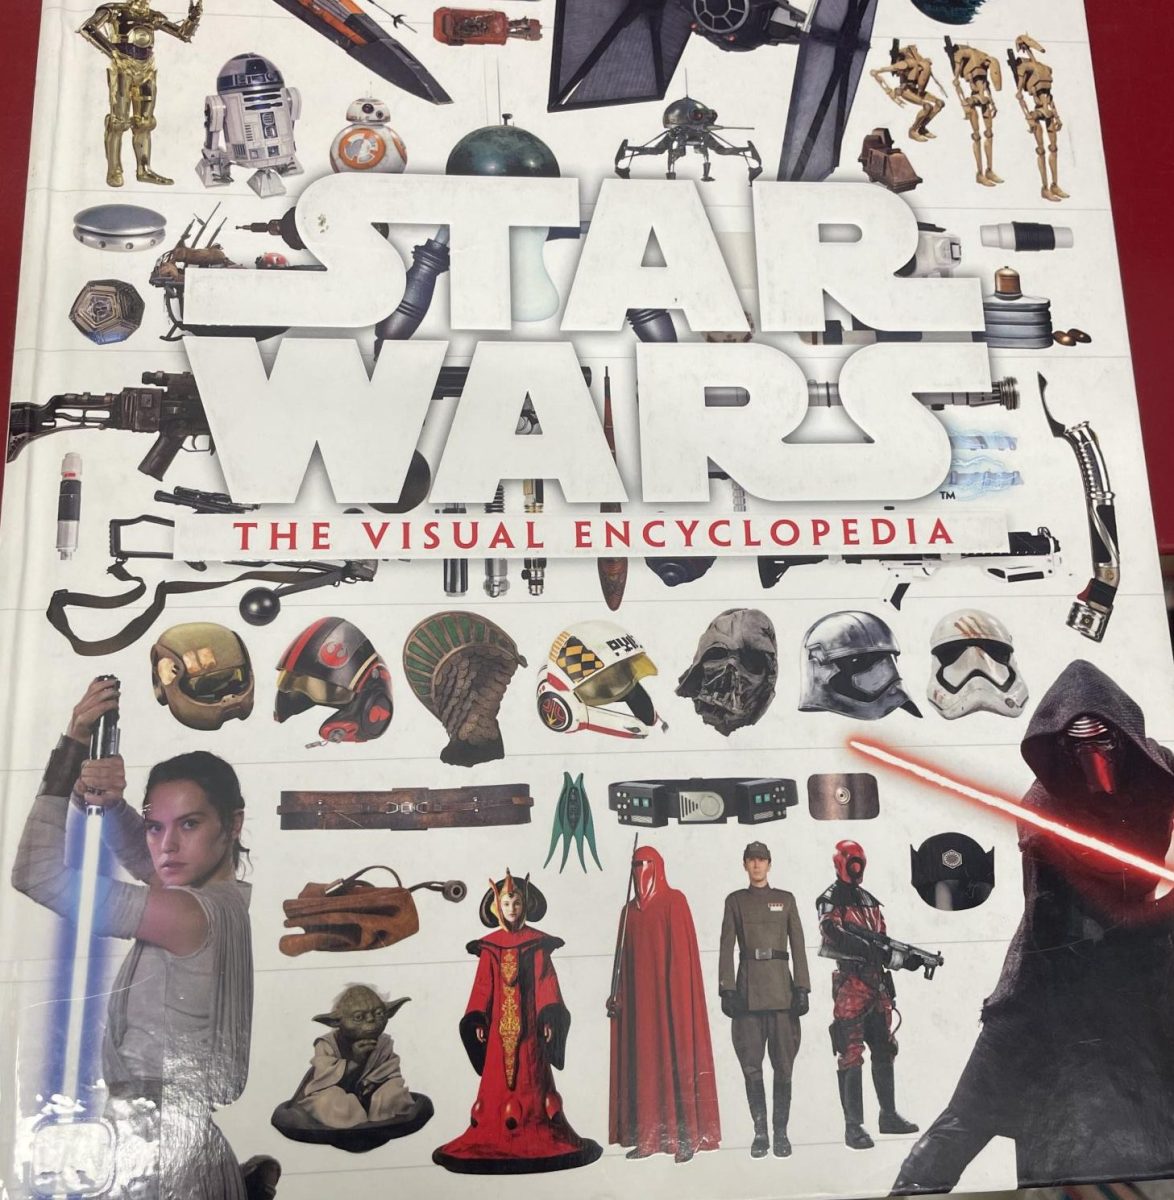 Star+Wars%3A+The+Visual+Encyclopedia+with+Rey+and+Padme+Amidala+in+the+lower+left+corner.+